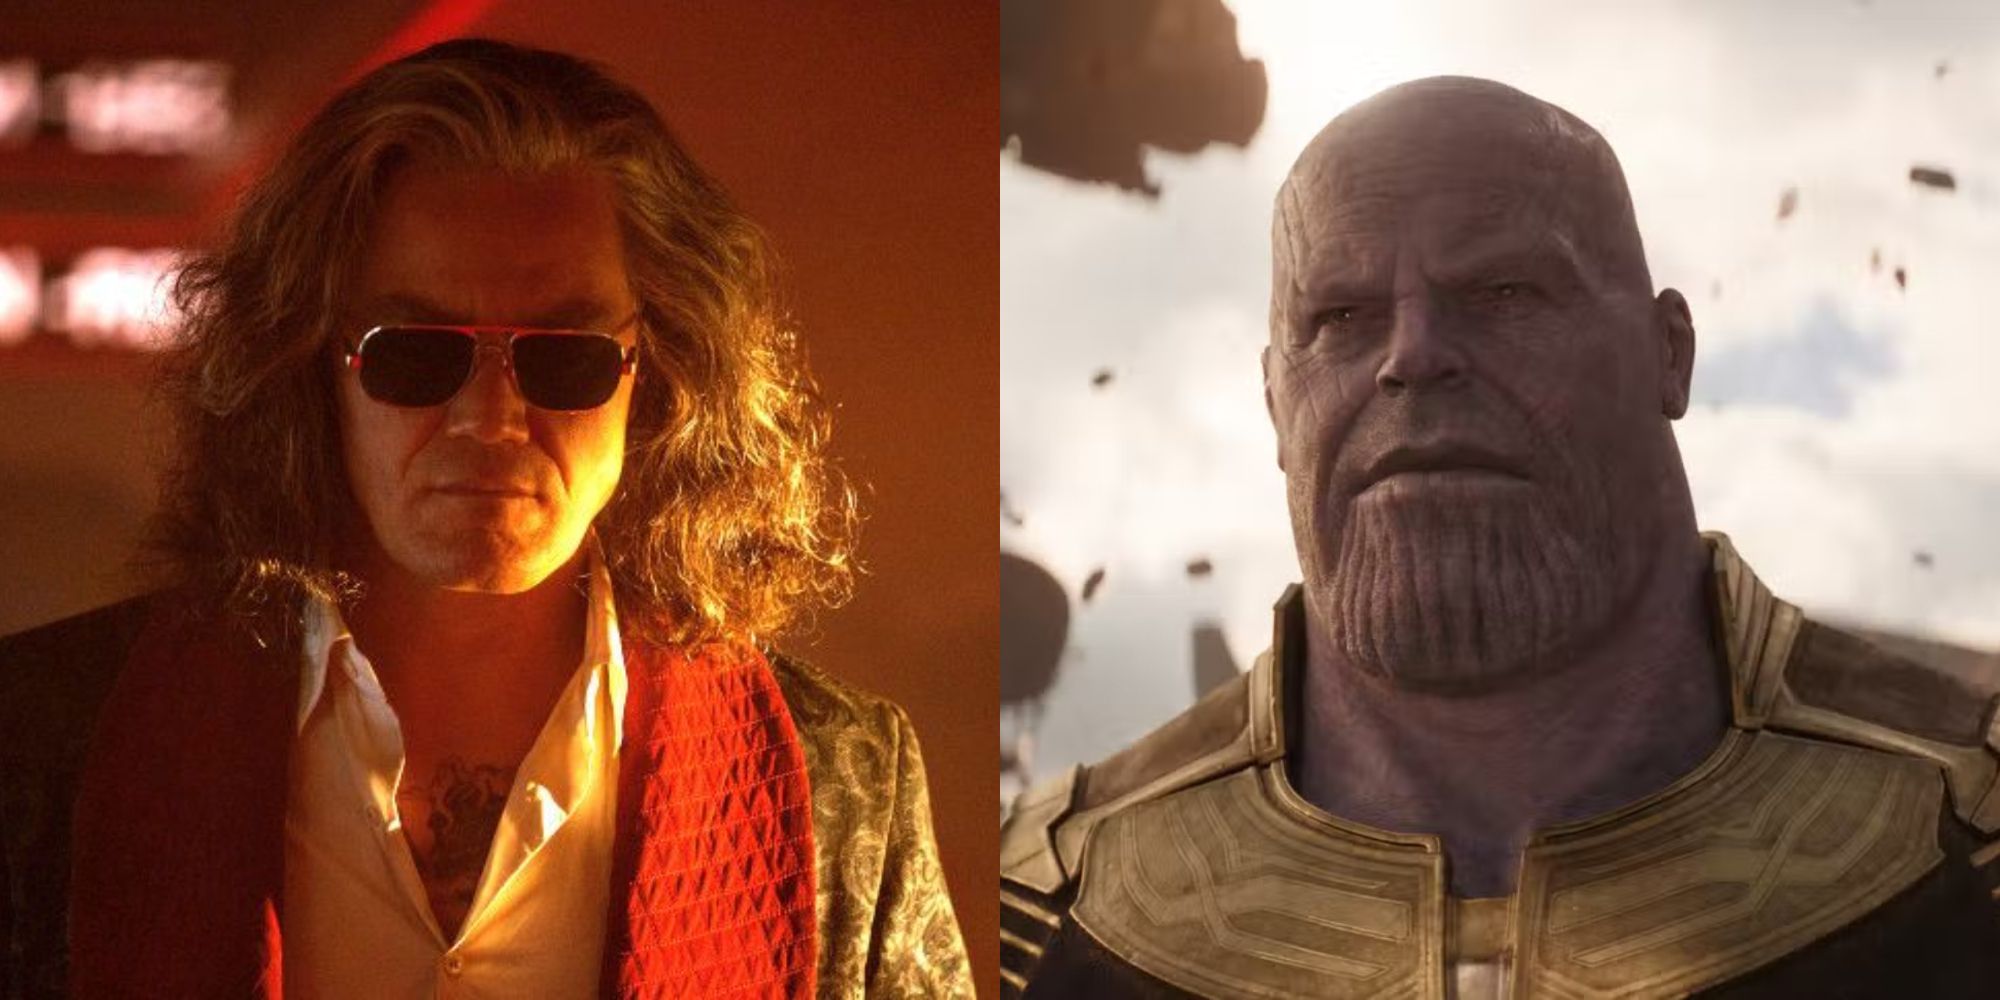 Split images of White Death wearing shades in Bullet Train and Thanos smiling in Avengers Infinity War